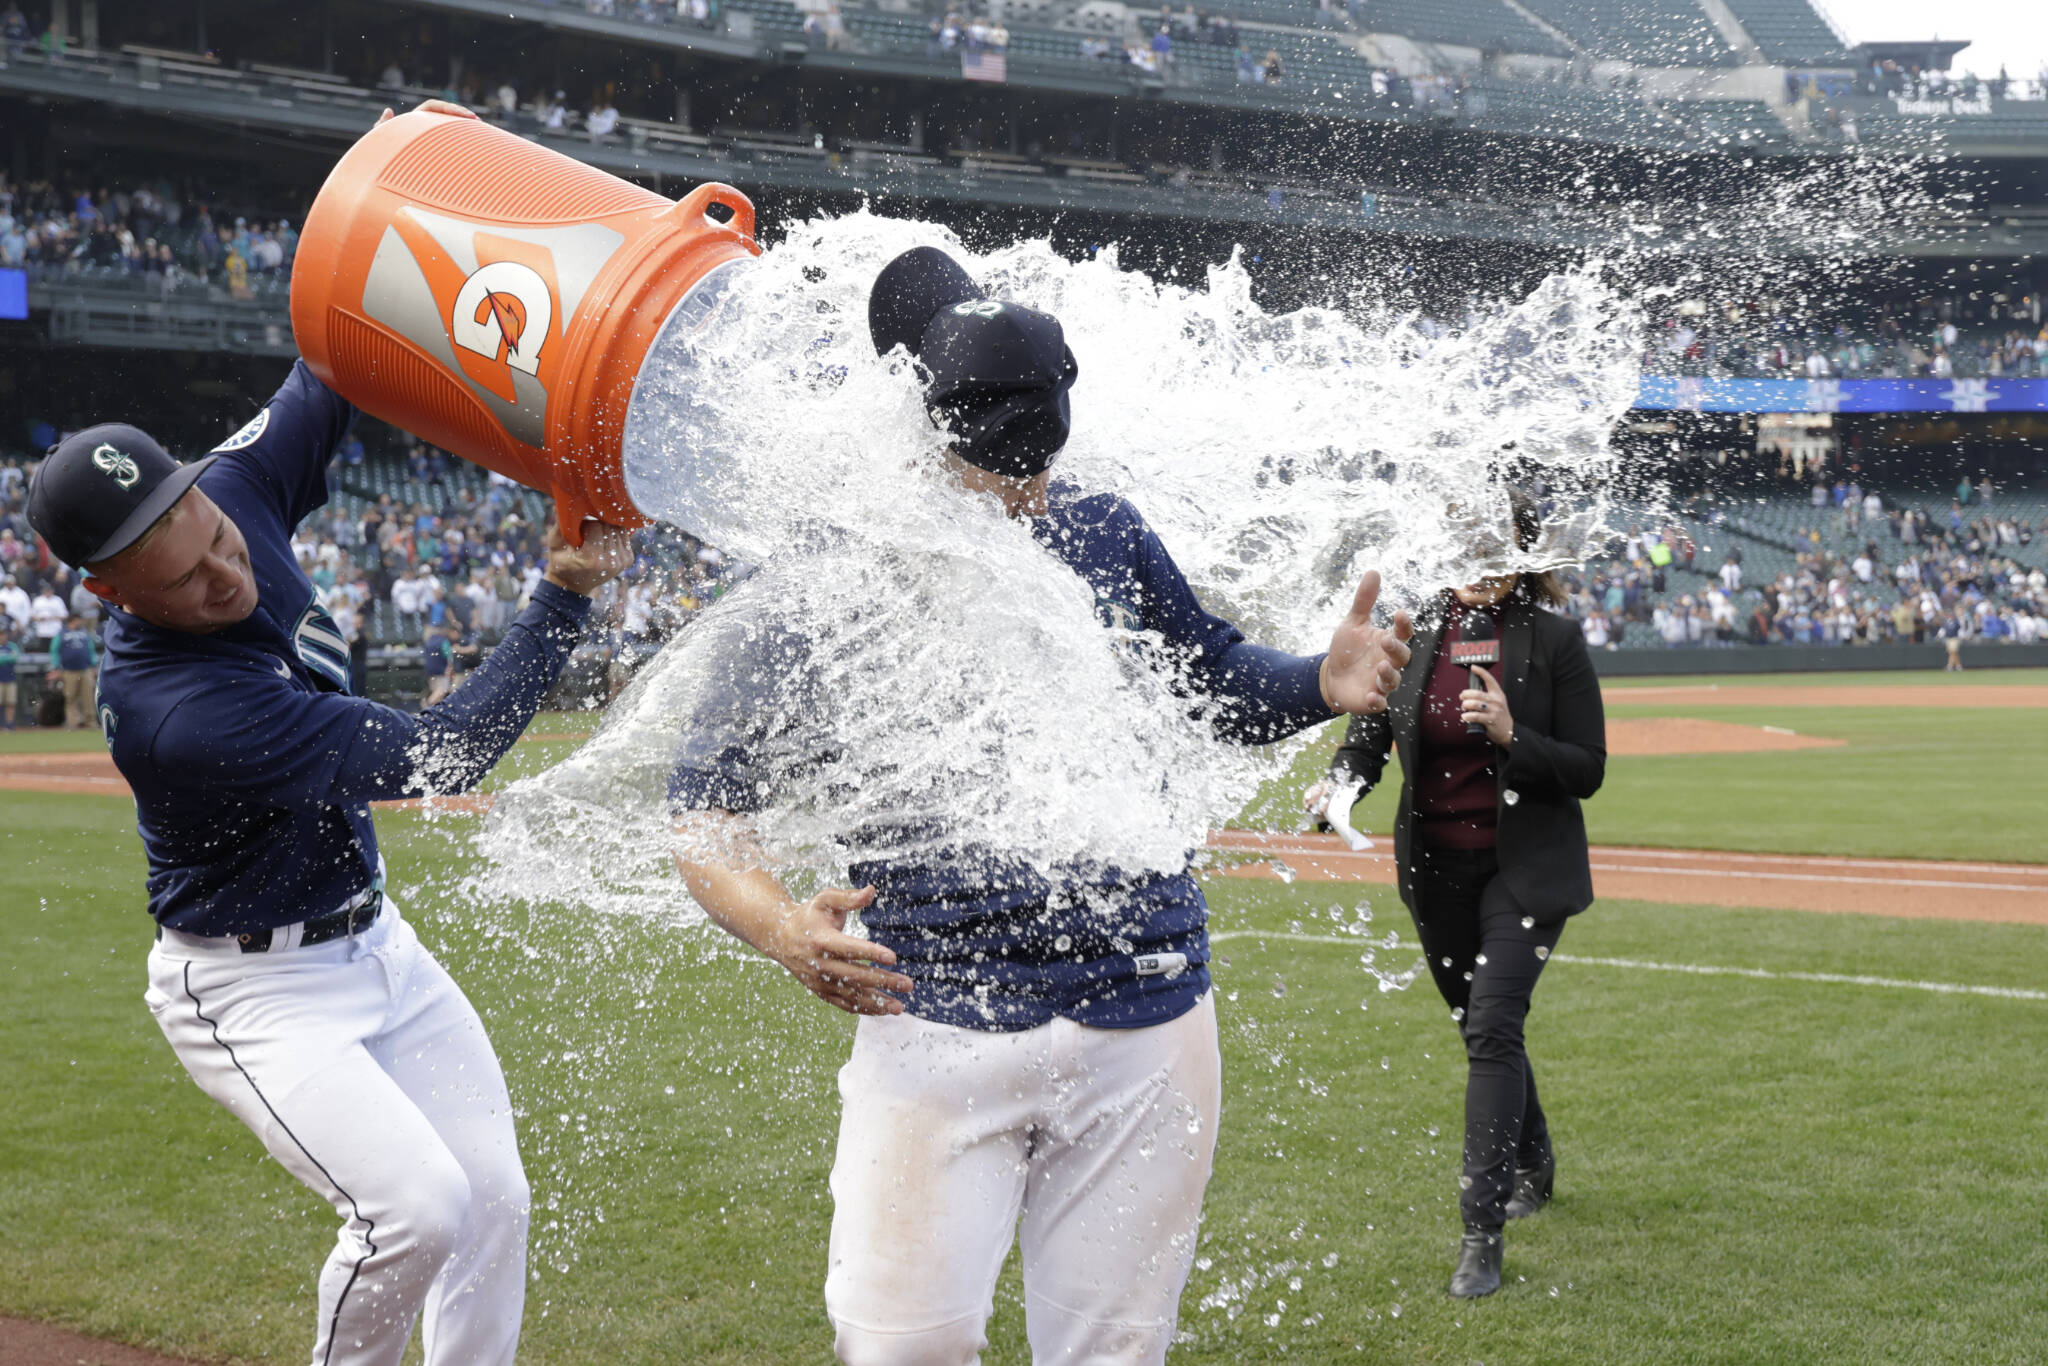 Mariners’ Ty France is doused by water by Jarred Kelenic after the team’s 5-4 walk-off win over the Tigers on Wednesday in Seattle. (AP Photo/John Froschauer)